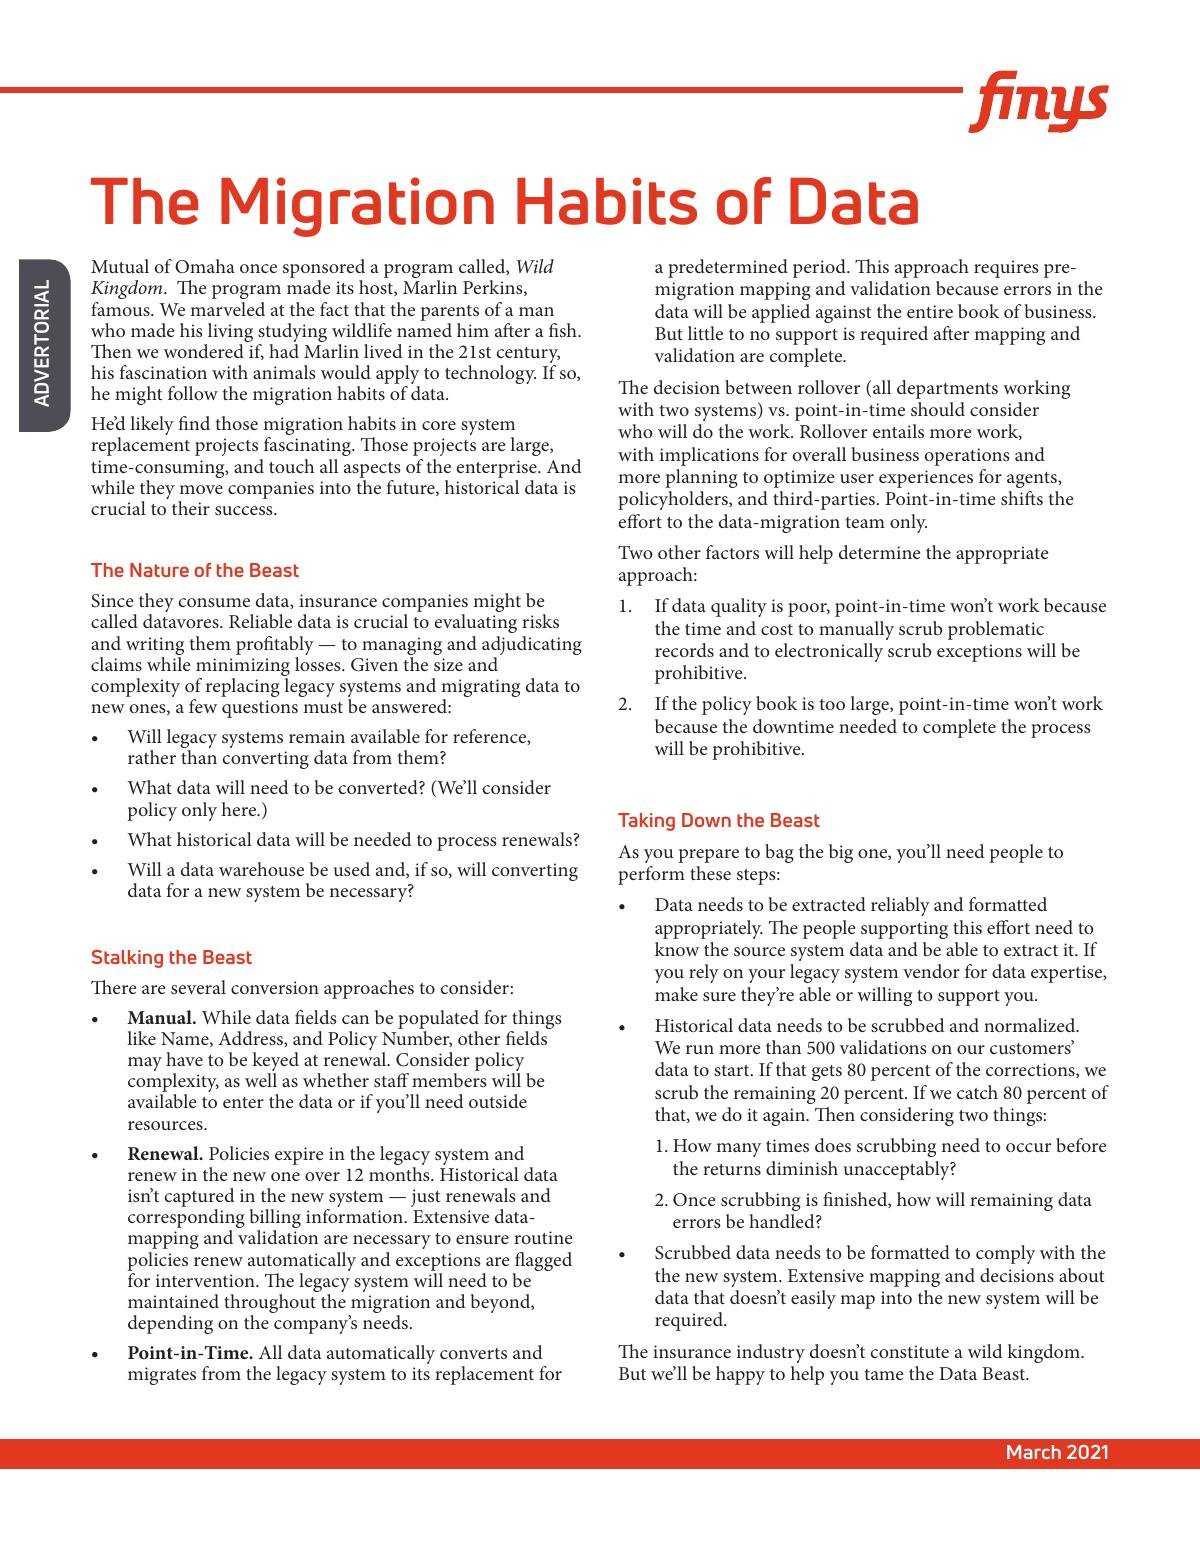 The Migration Habits of Data